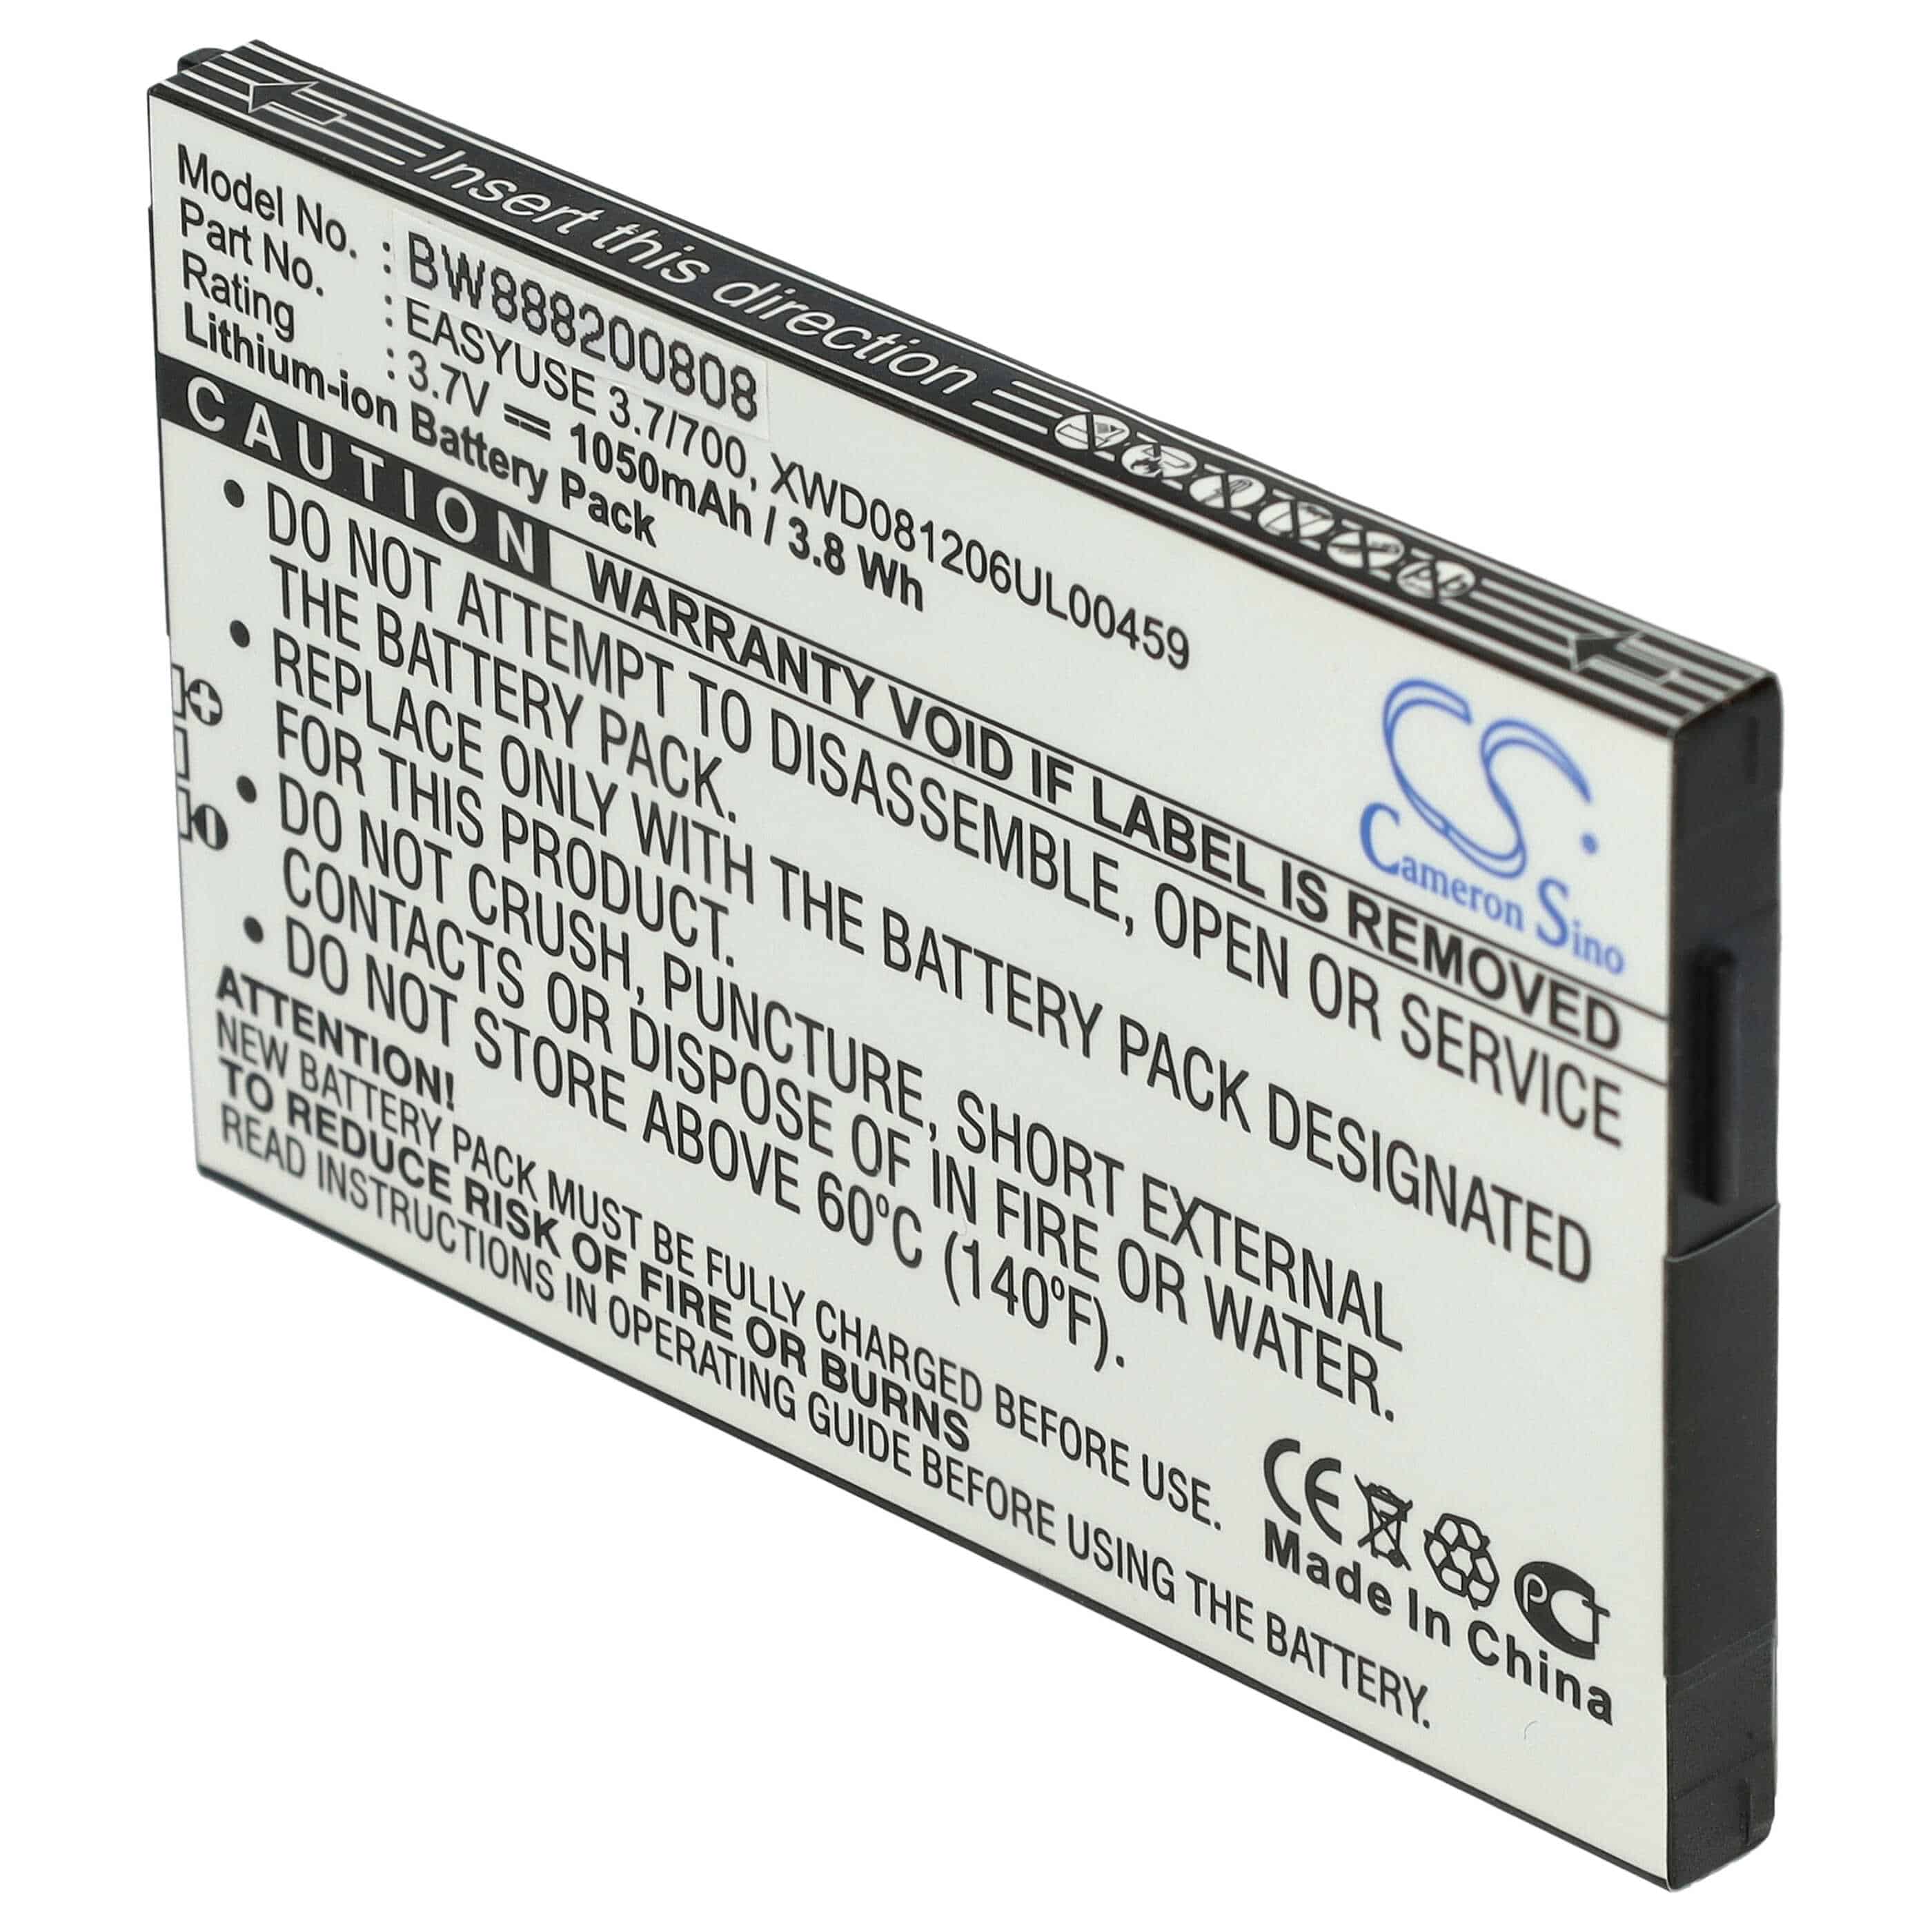 Mobile Phone Battery Replacement for Doro XWD081206UL00459, EASYUSE 3.7/700, DBK-700 - 1050mAh 3.7V Li-Ion